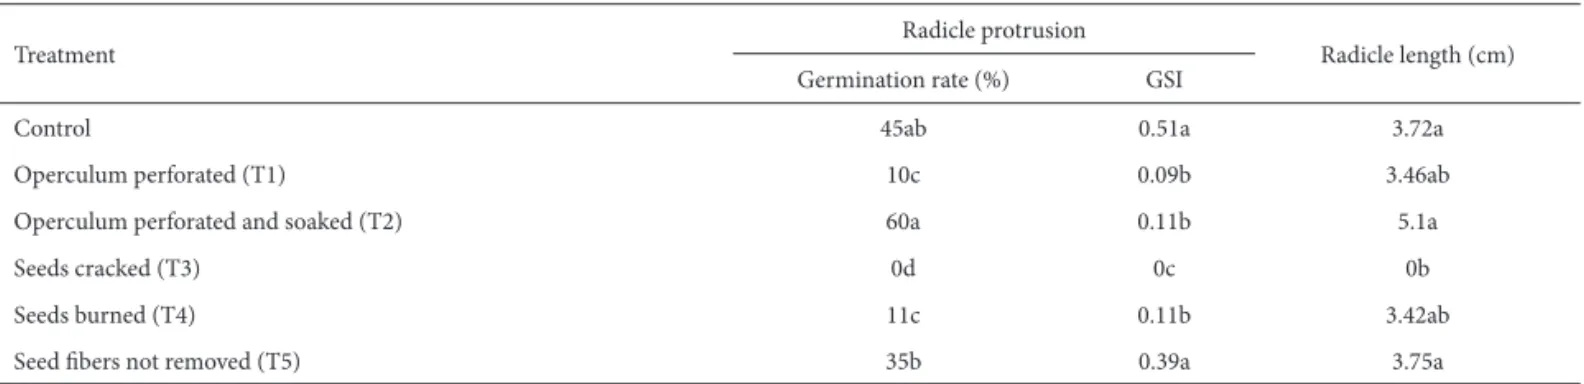 Table 3. Germination rate, germination speed index and radicle length (cm) during the radicle protrusion stage in the six dormancy suppression treatments for  seeds of Syagrus romanzoffi   ana (Cham.) Glassm., Arecaceae, collected on Santa Catarina Island,